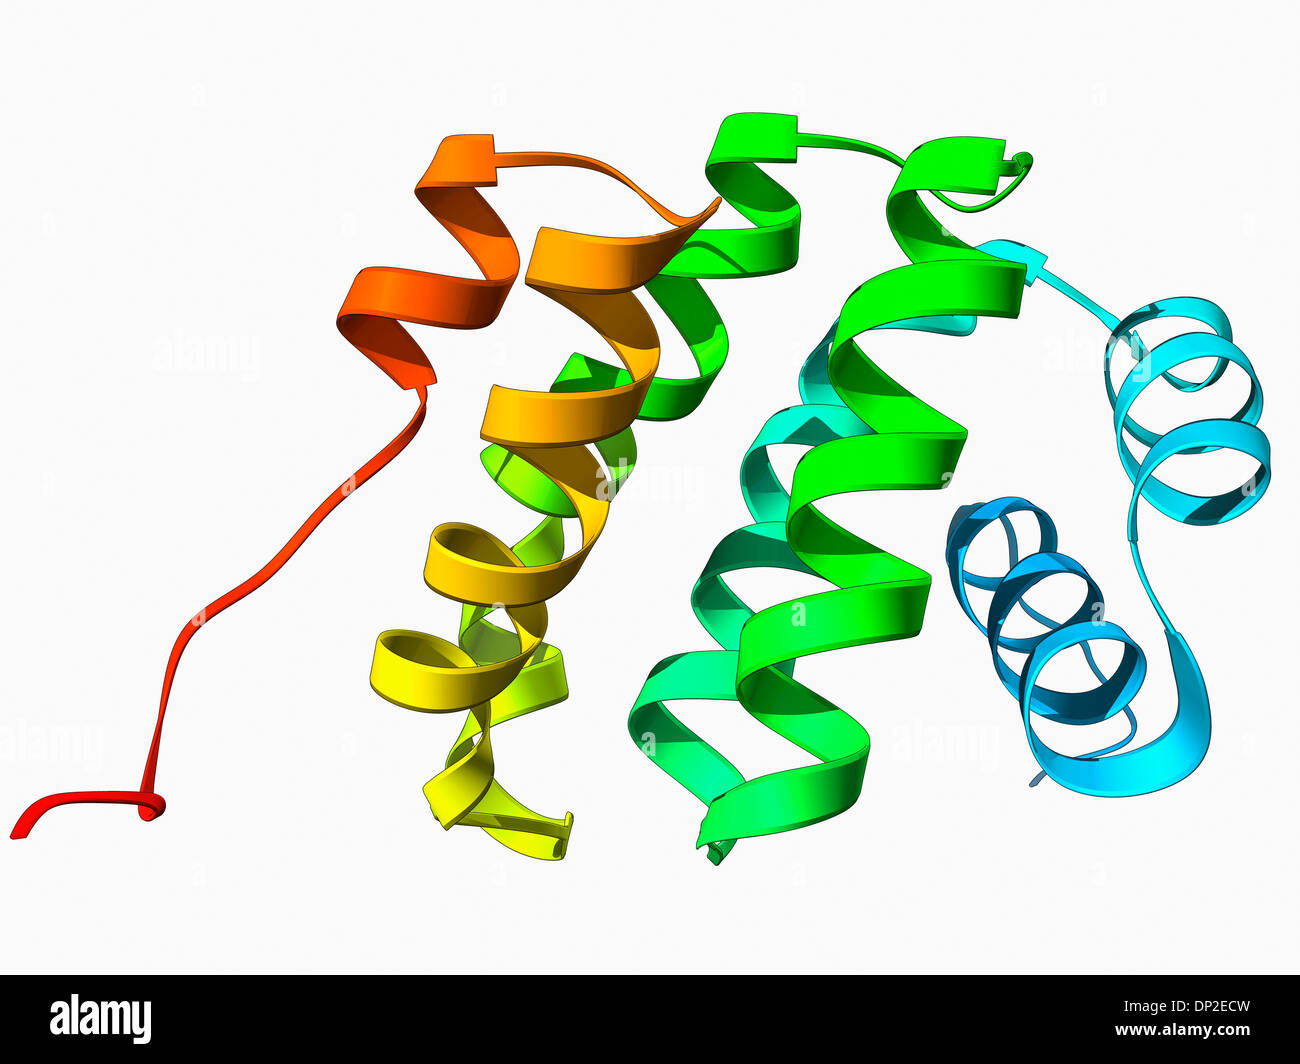 Programmed cell death protein molecule Stock Photo